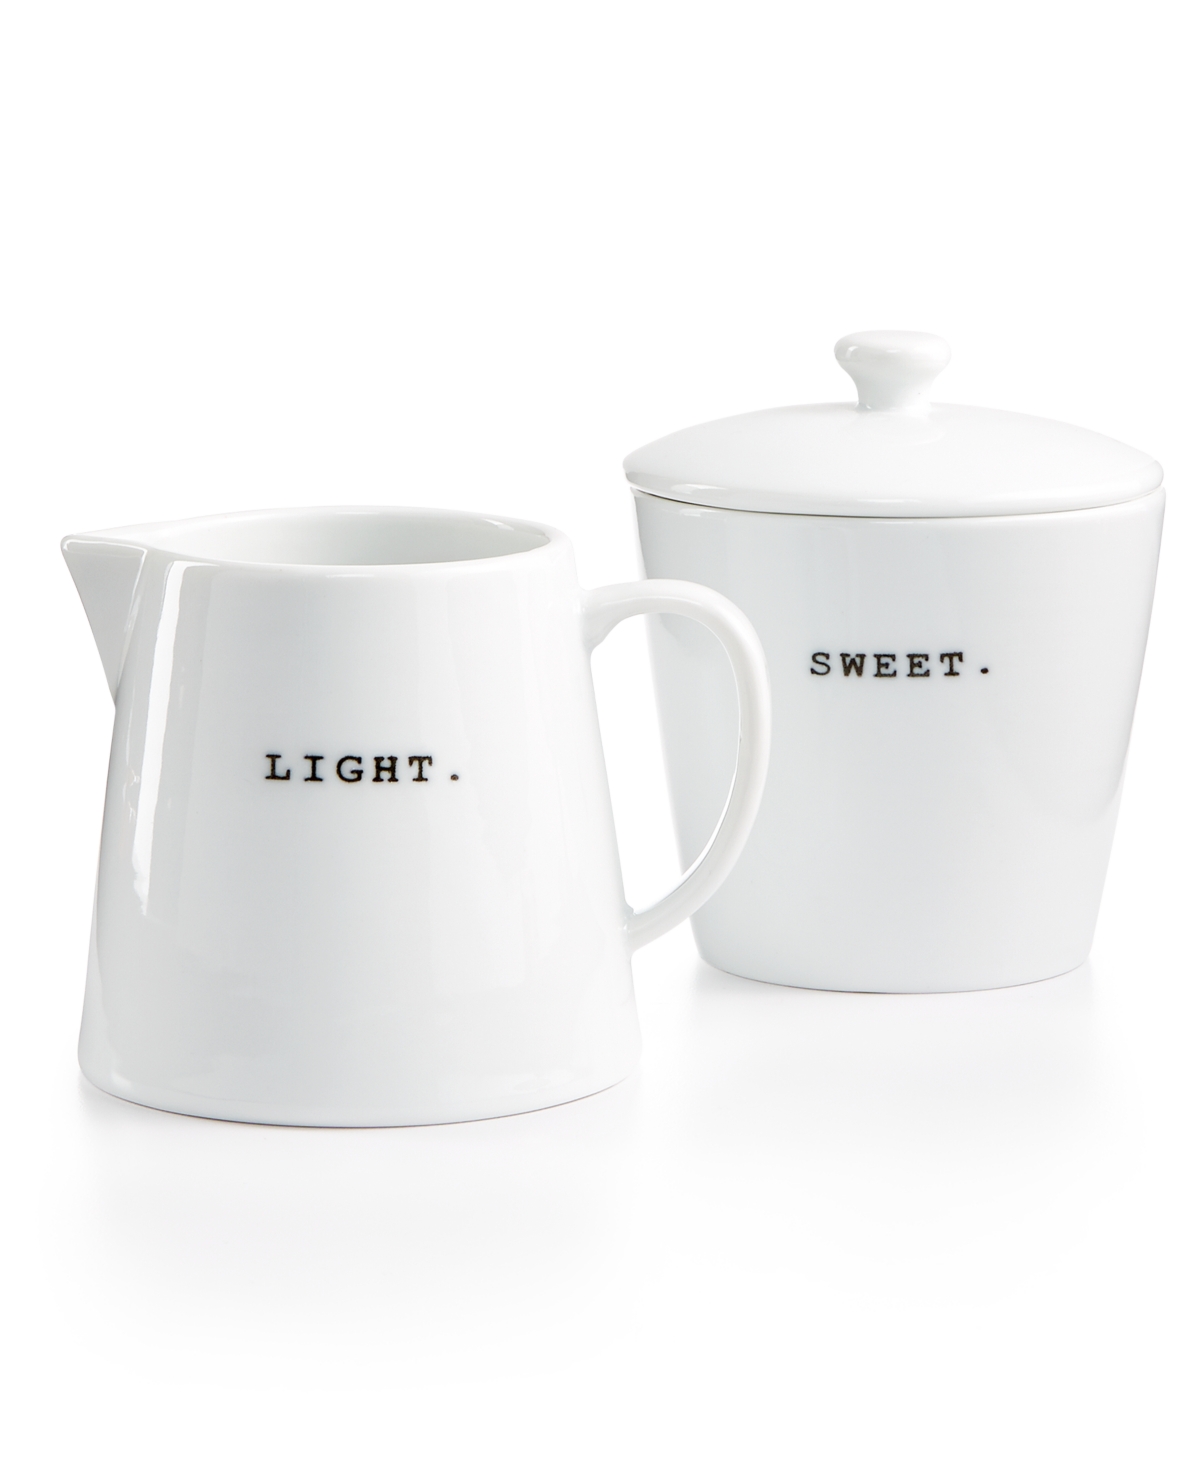 Whiteware Words Collection Light & Sweet Sugar & Creamer, Created for Macy's